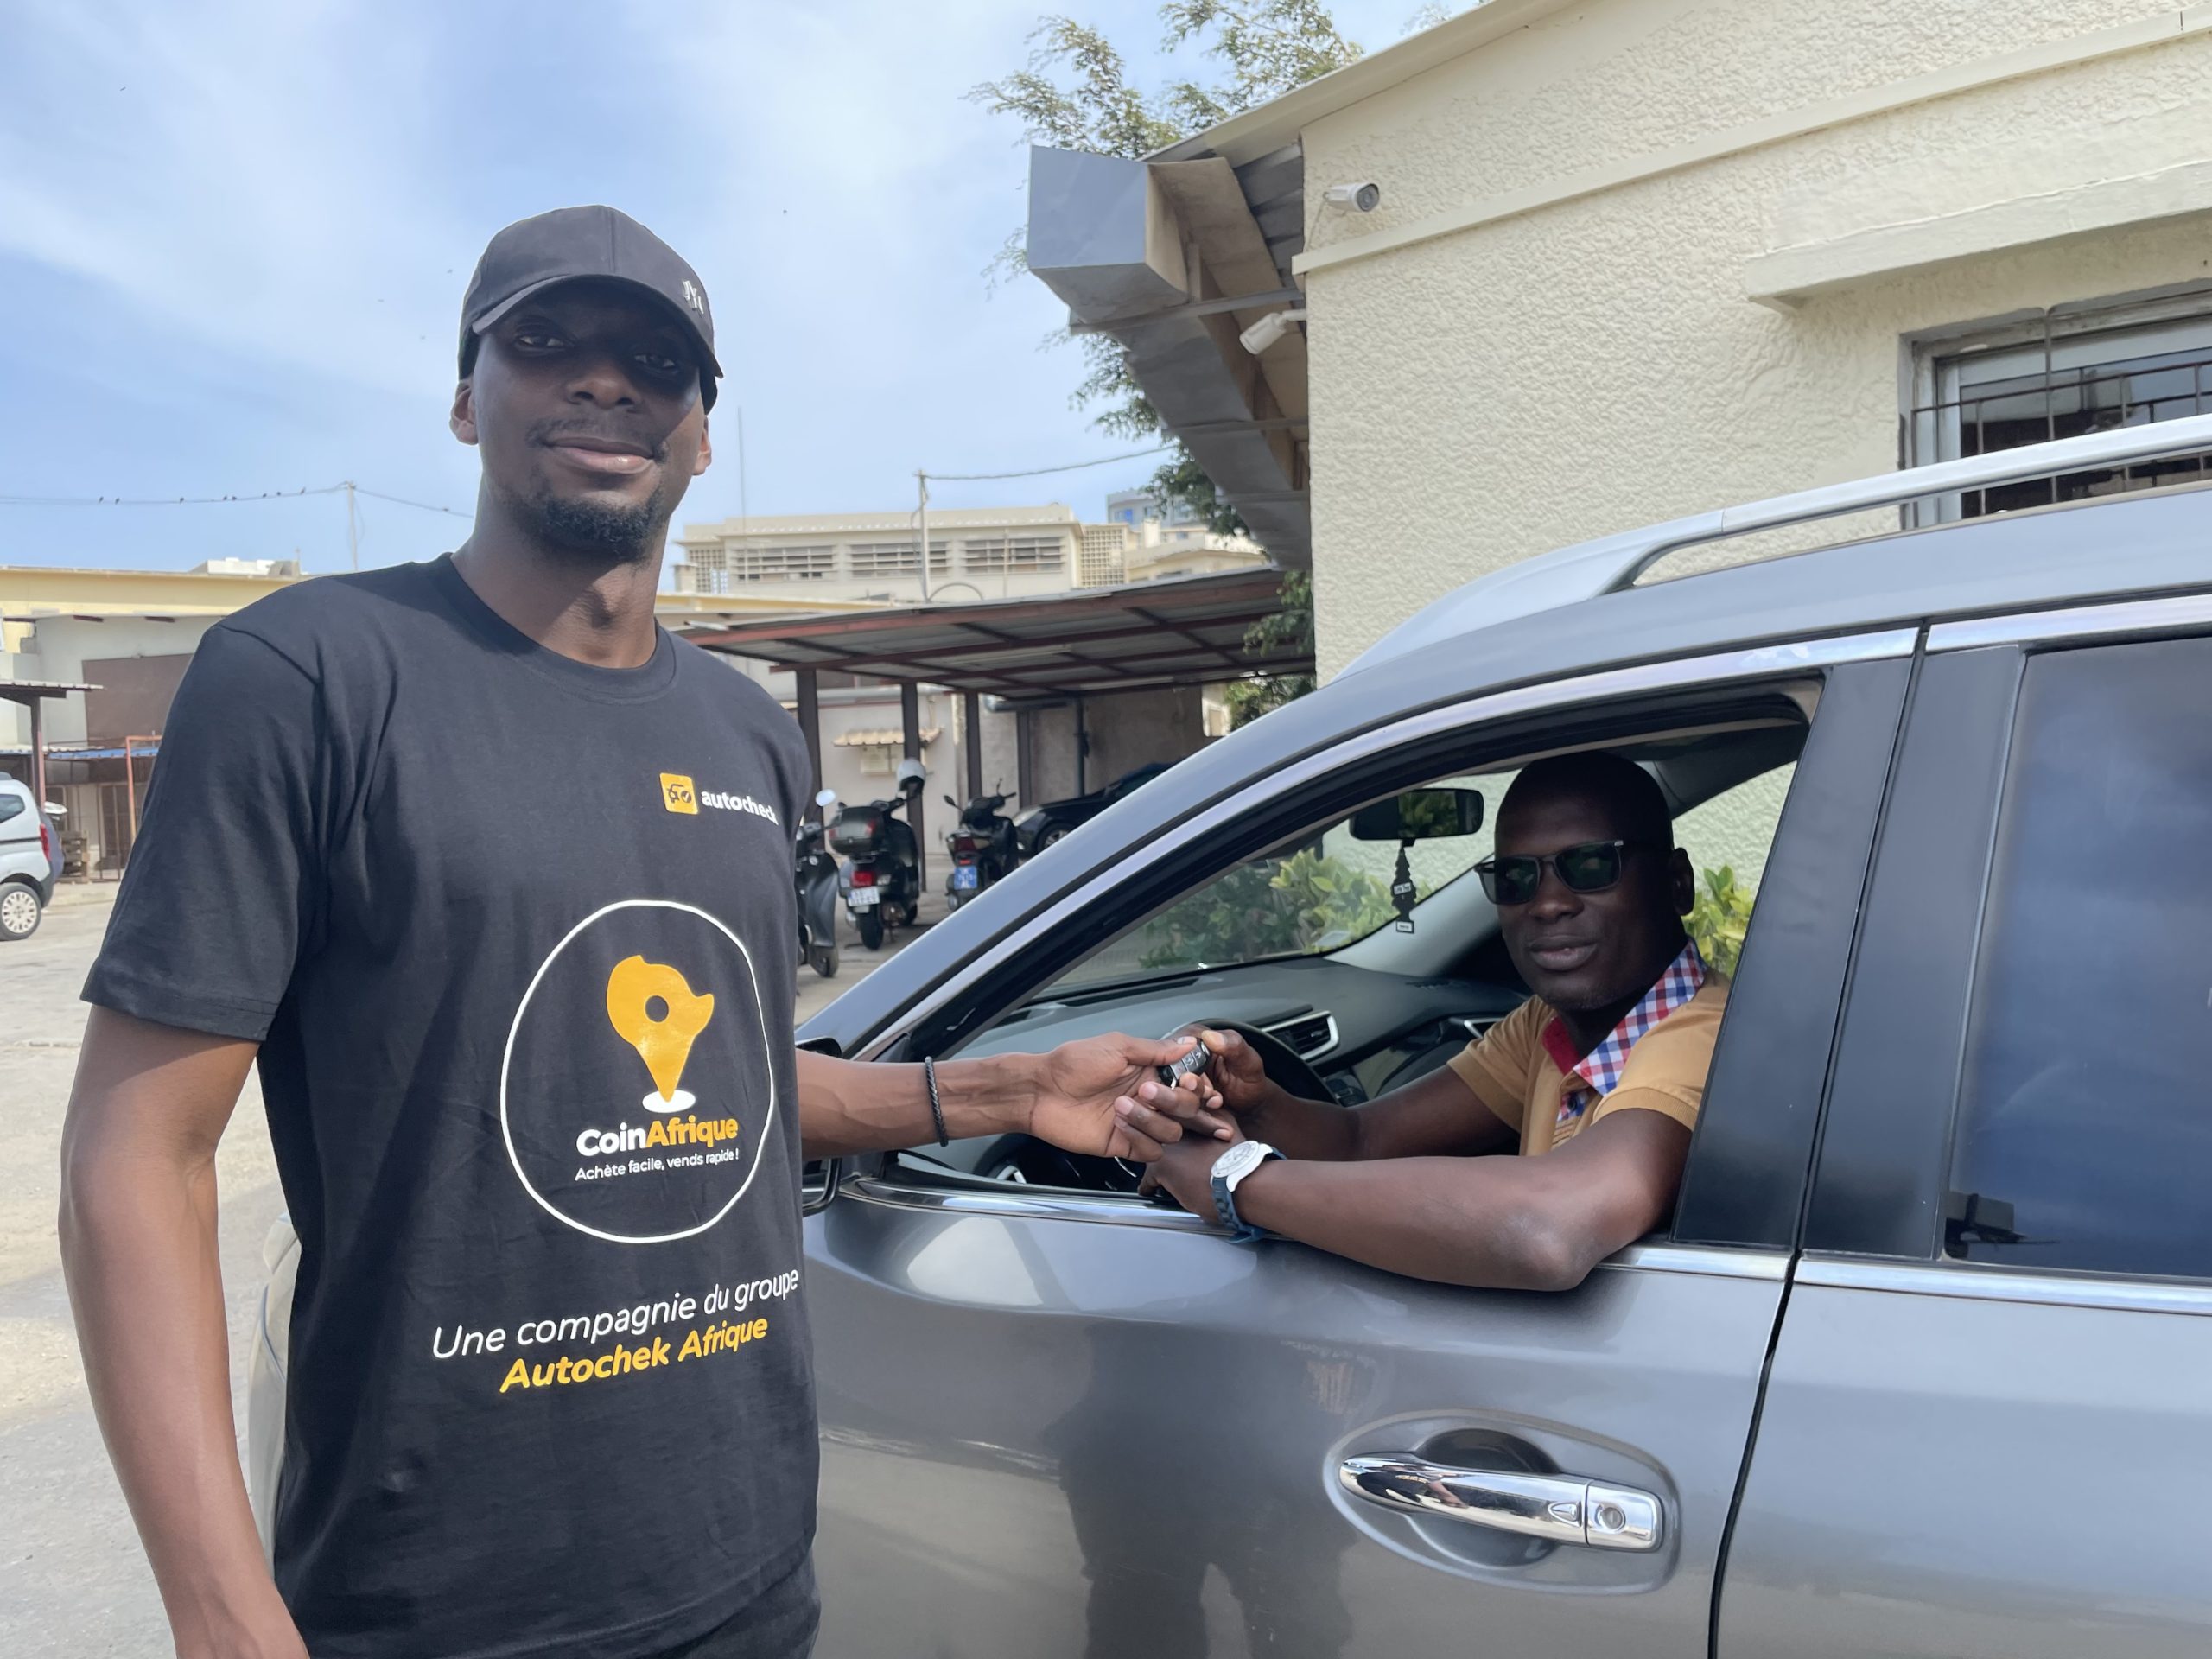 Autochek acquires CoinAfrique to boost its francophone Africa presence